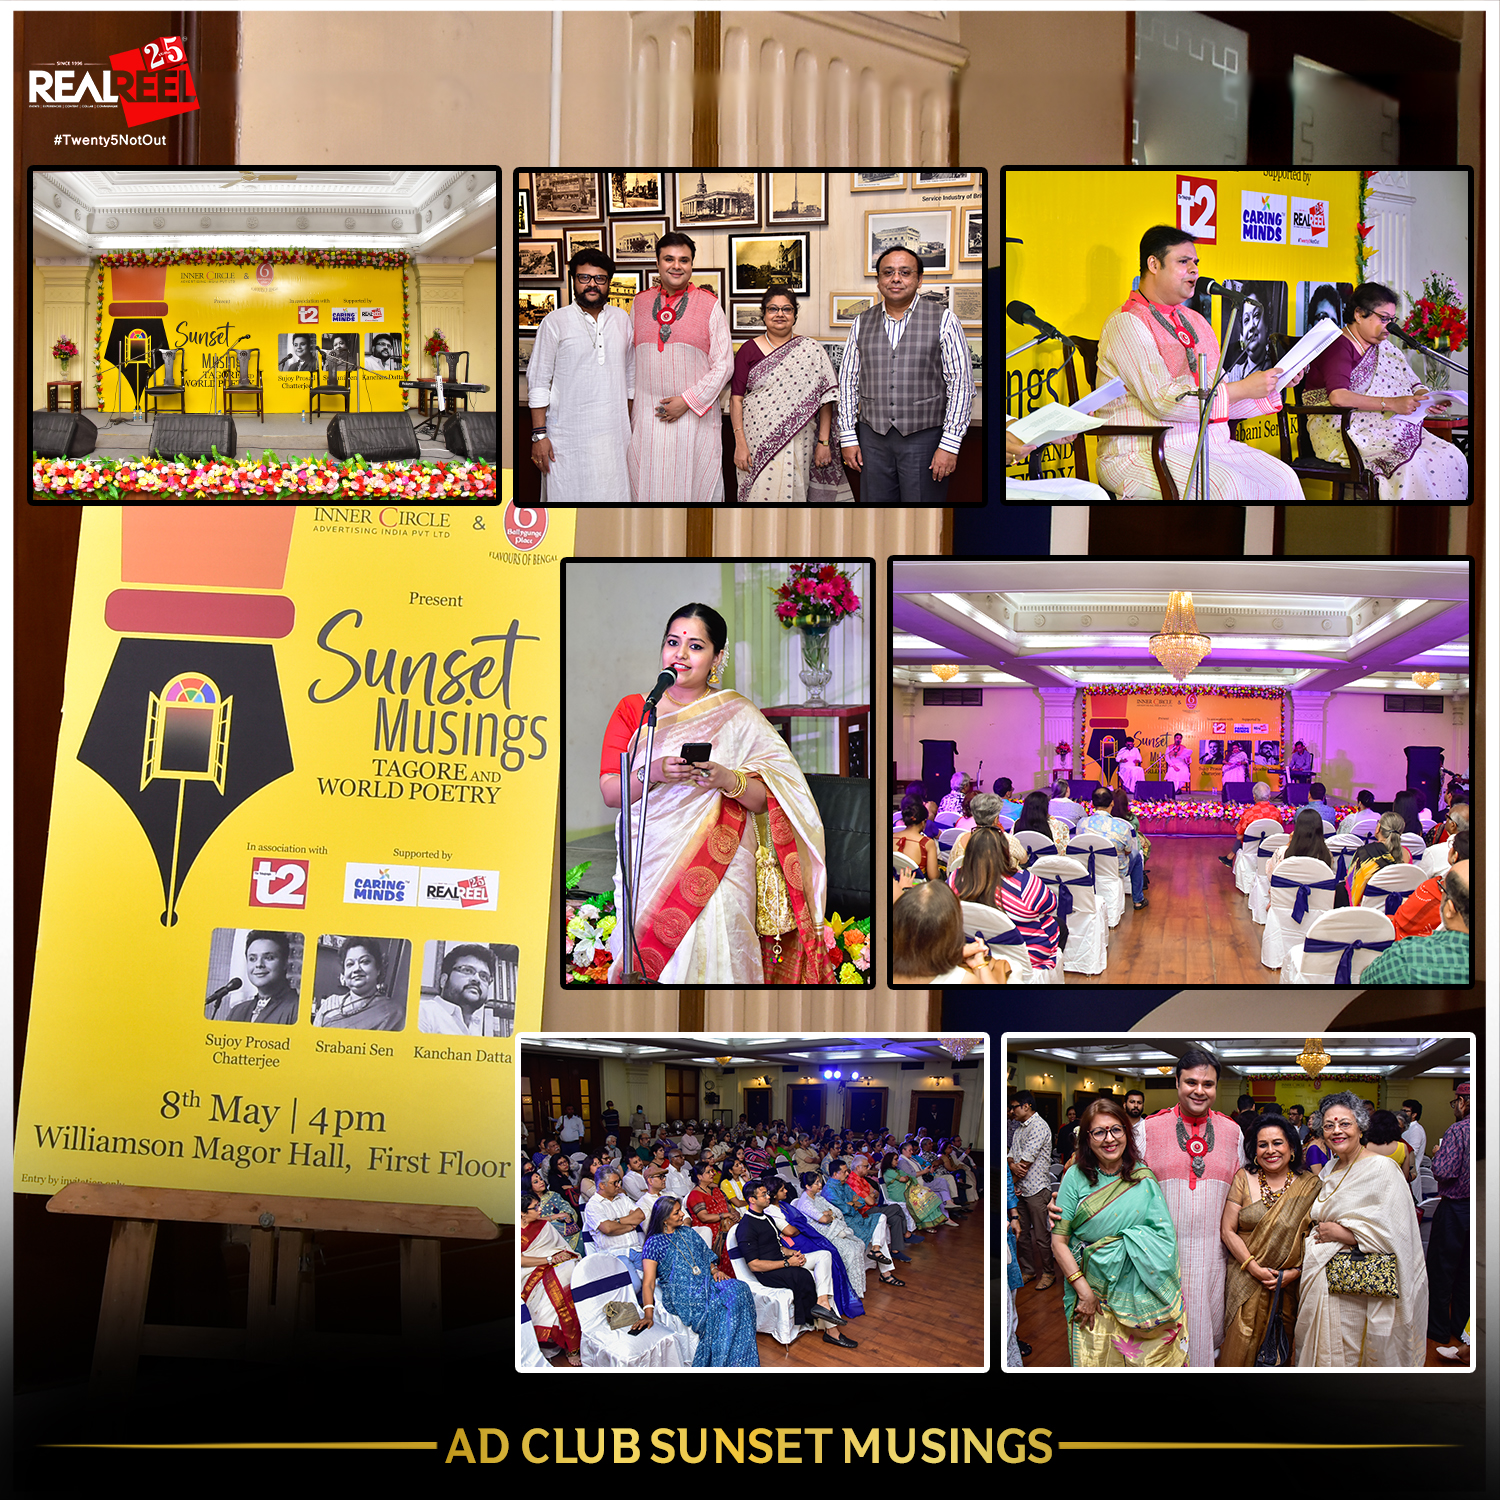 Sunset Musings Event on 08.05.22 at BCCI Williamson Magor Hall